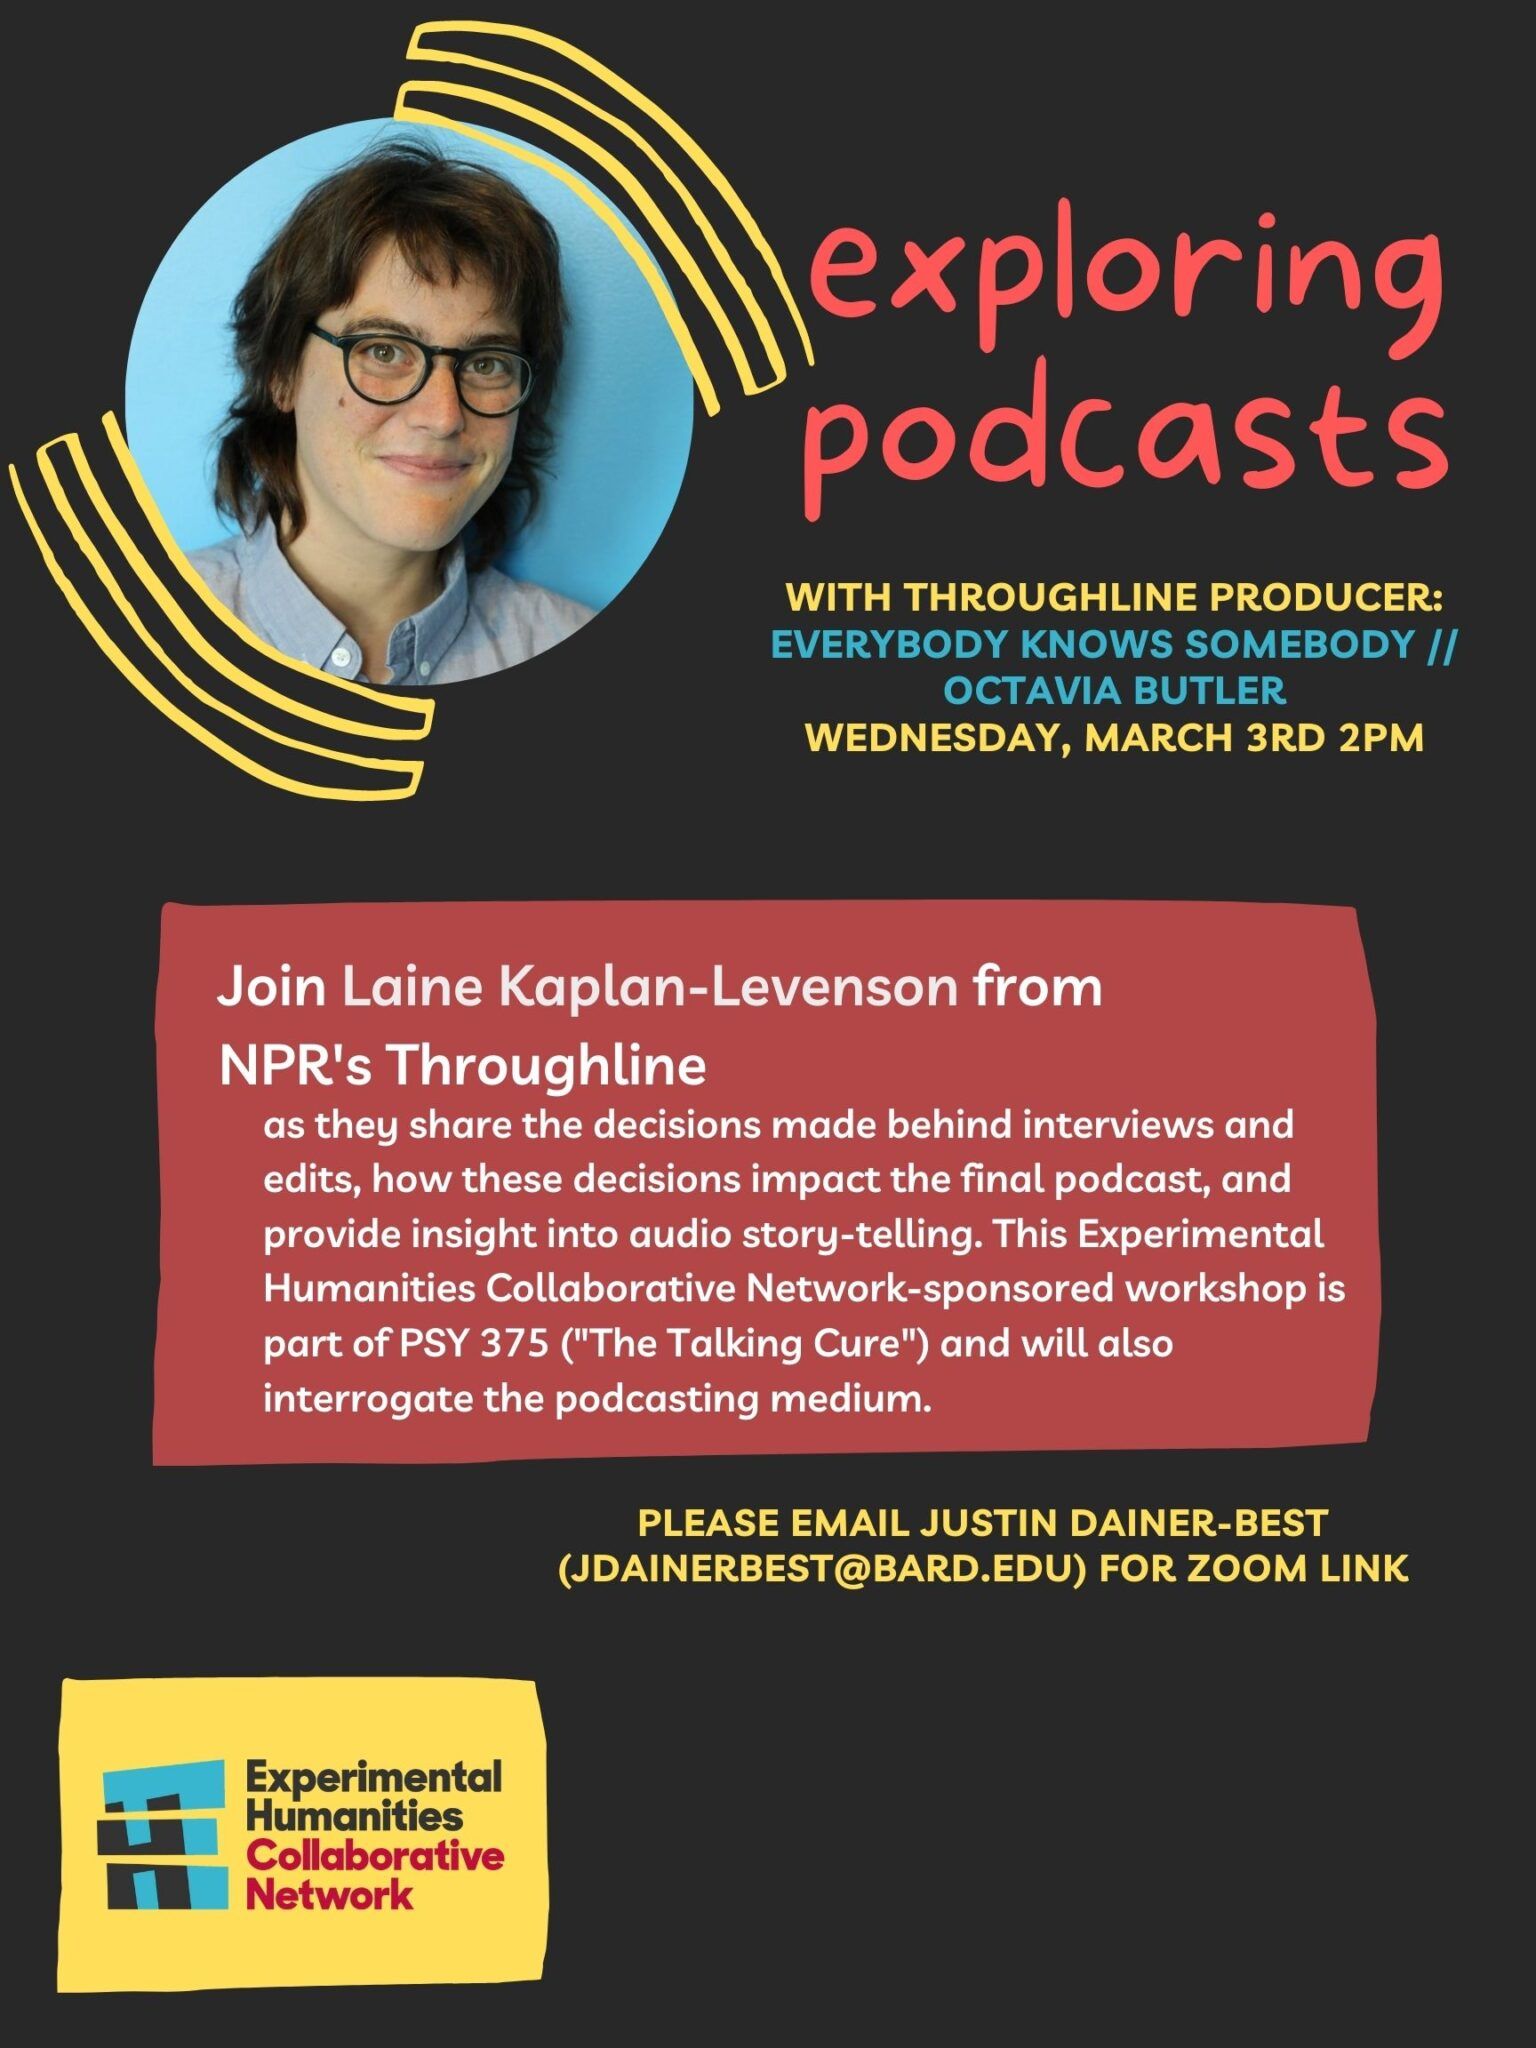 Poster. Text reads: join Laine Kaplan-Levinson from NPR’s Throughline. Image of Kaplan-Levinson.